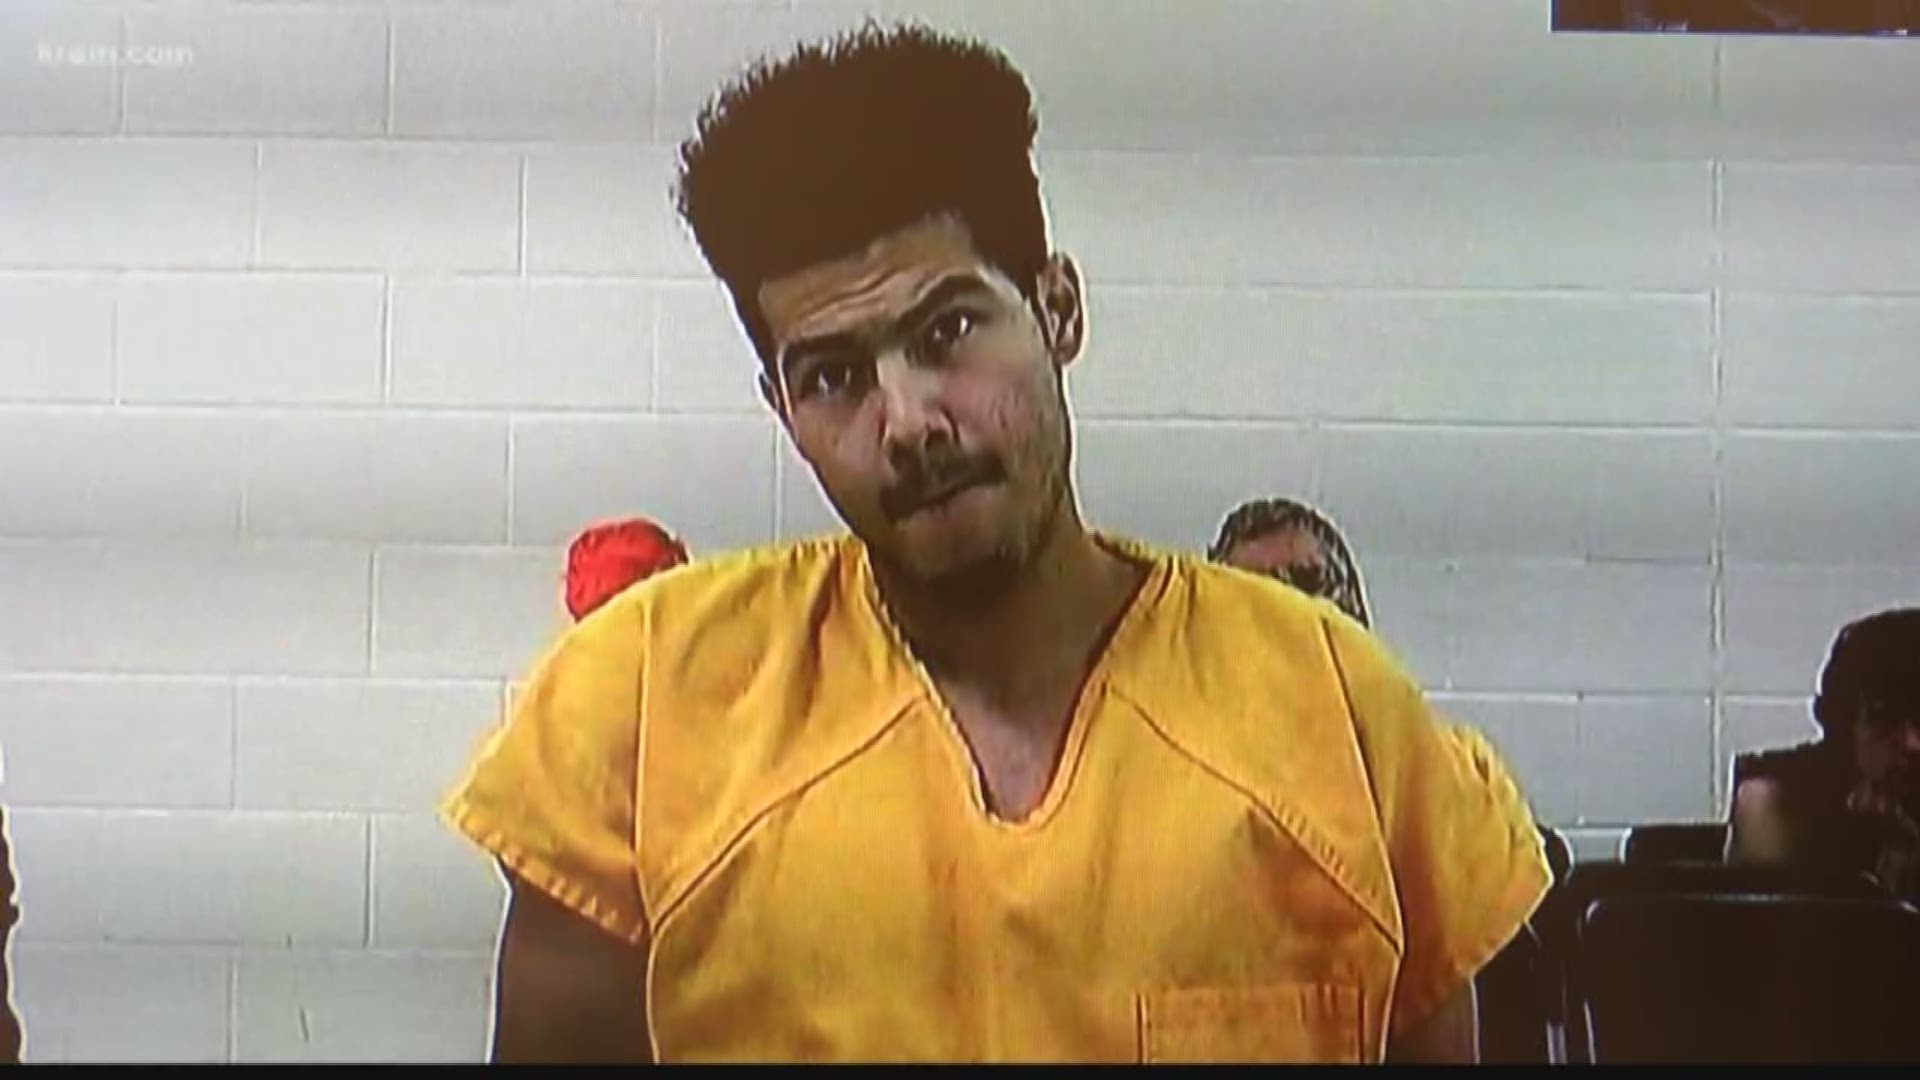 According to court documents, Tyler Rambo is accused of attempting to shoot another man on the Fourth of July and pointing a gun at a woman.